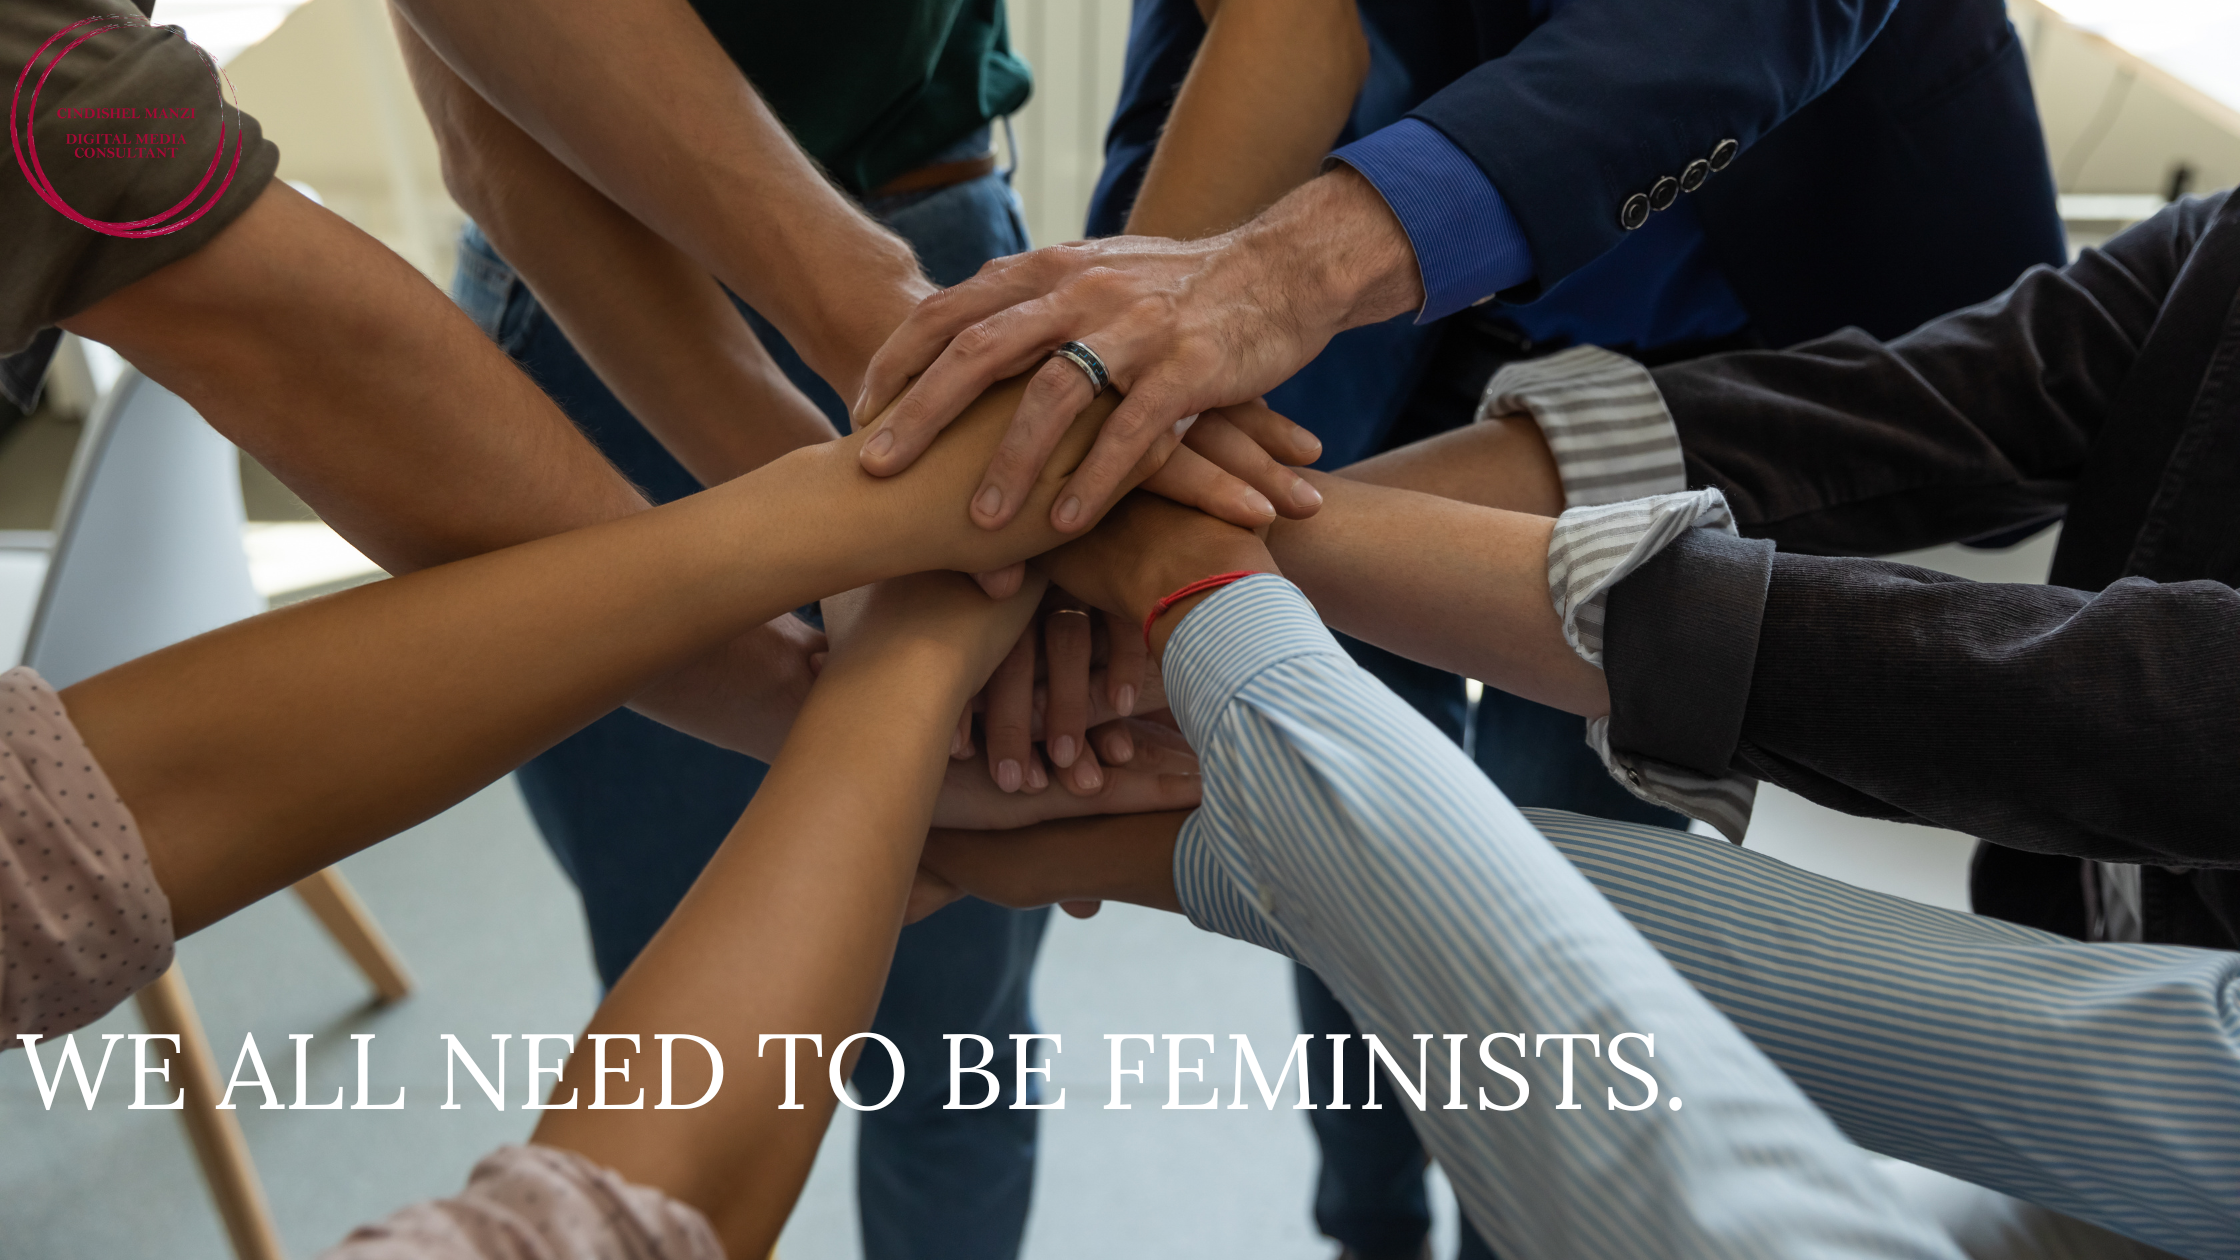 We All Need To Be Feminists.